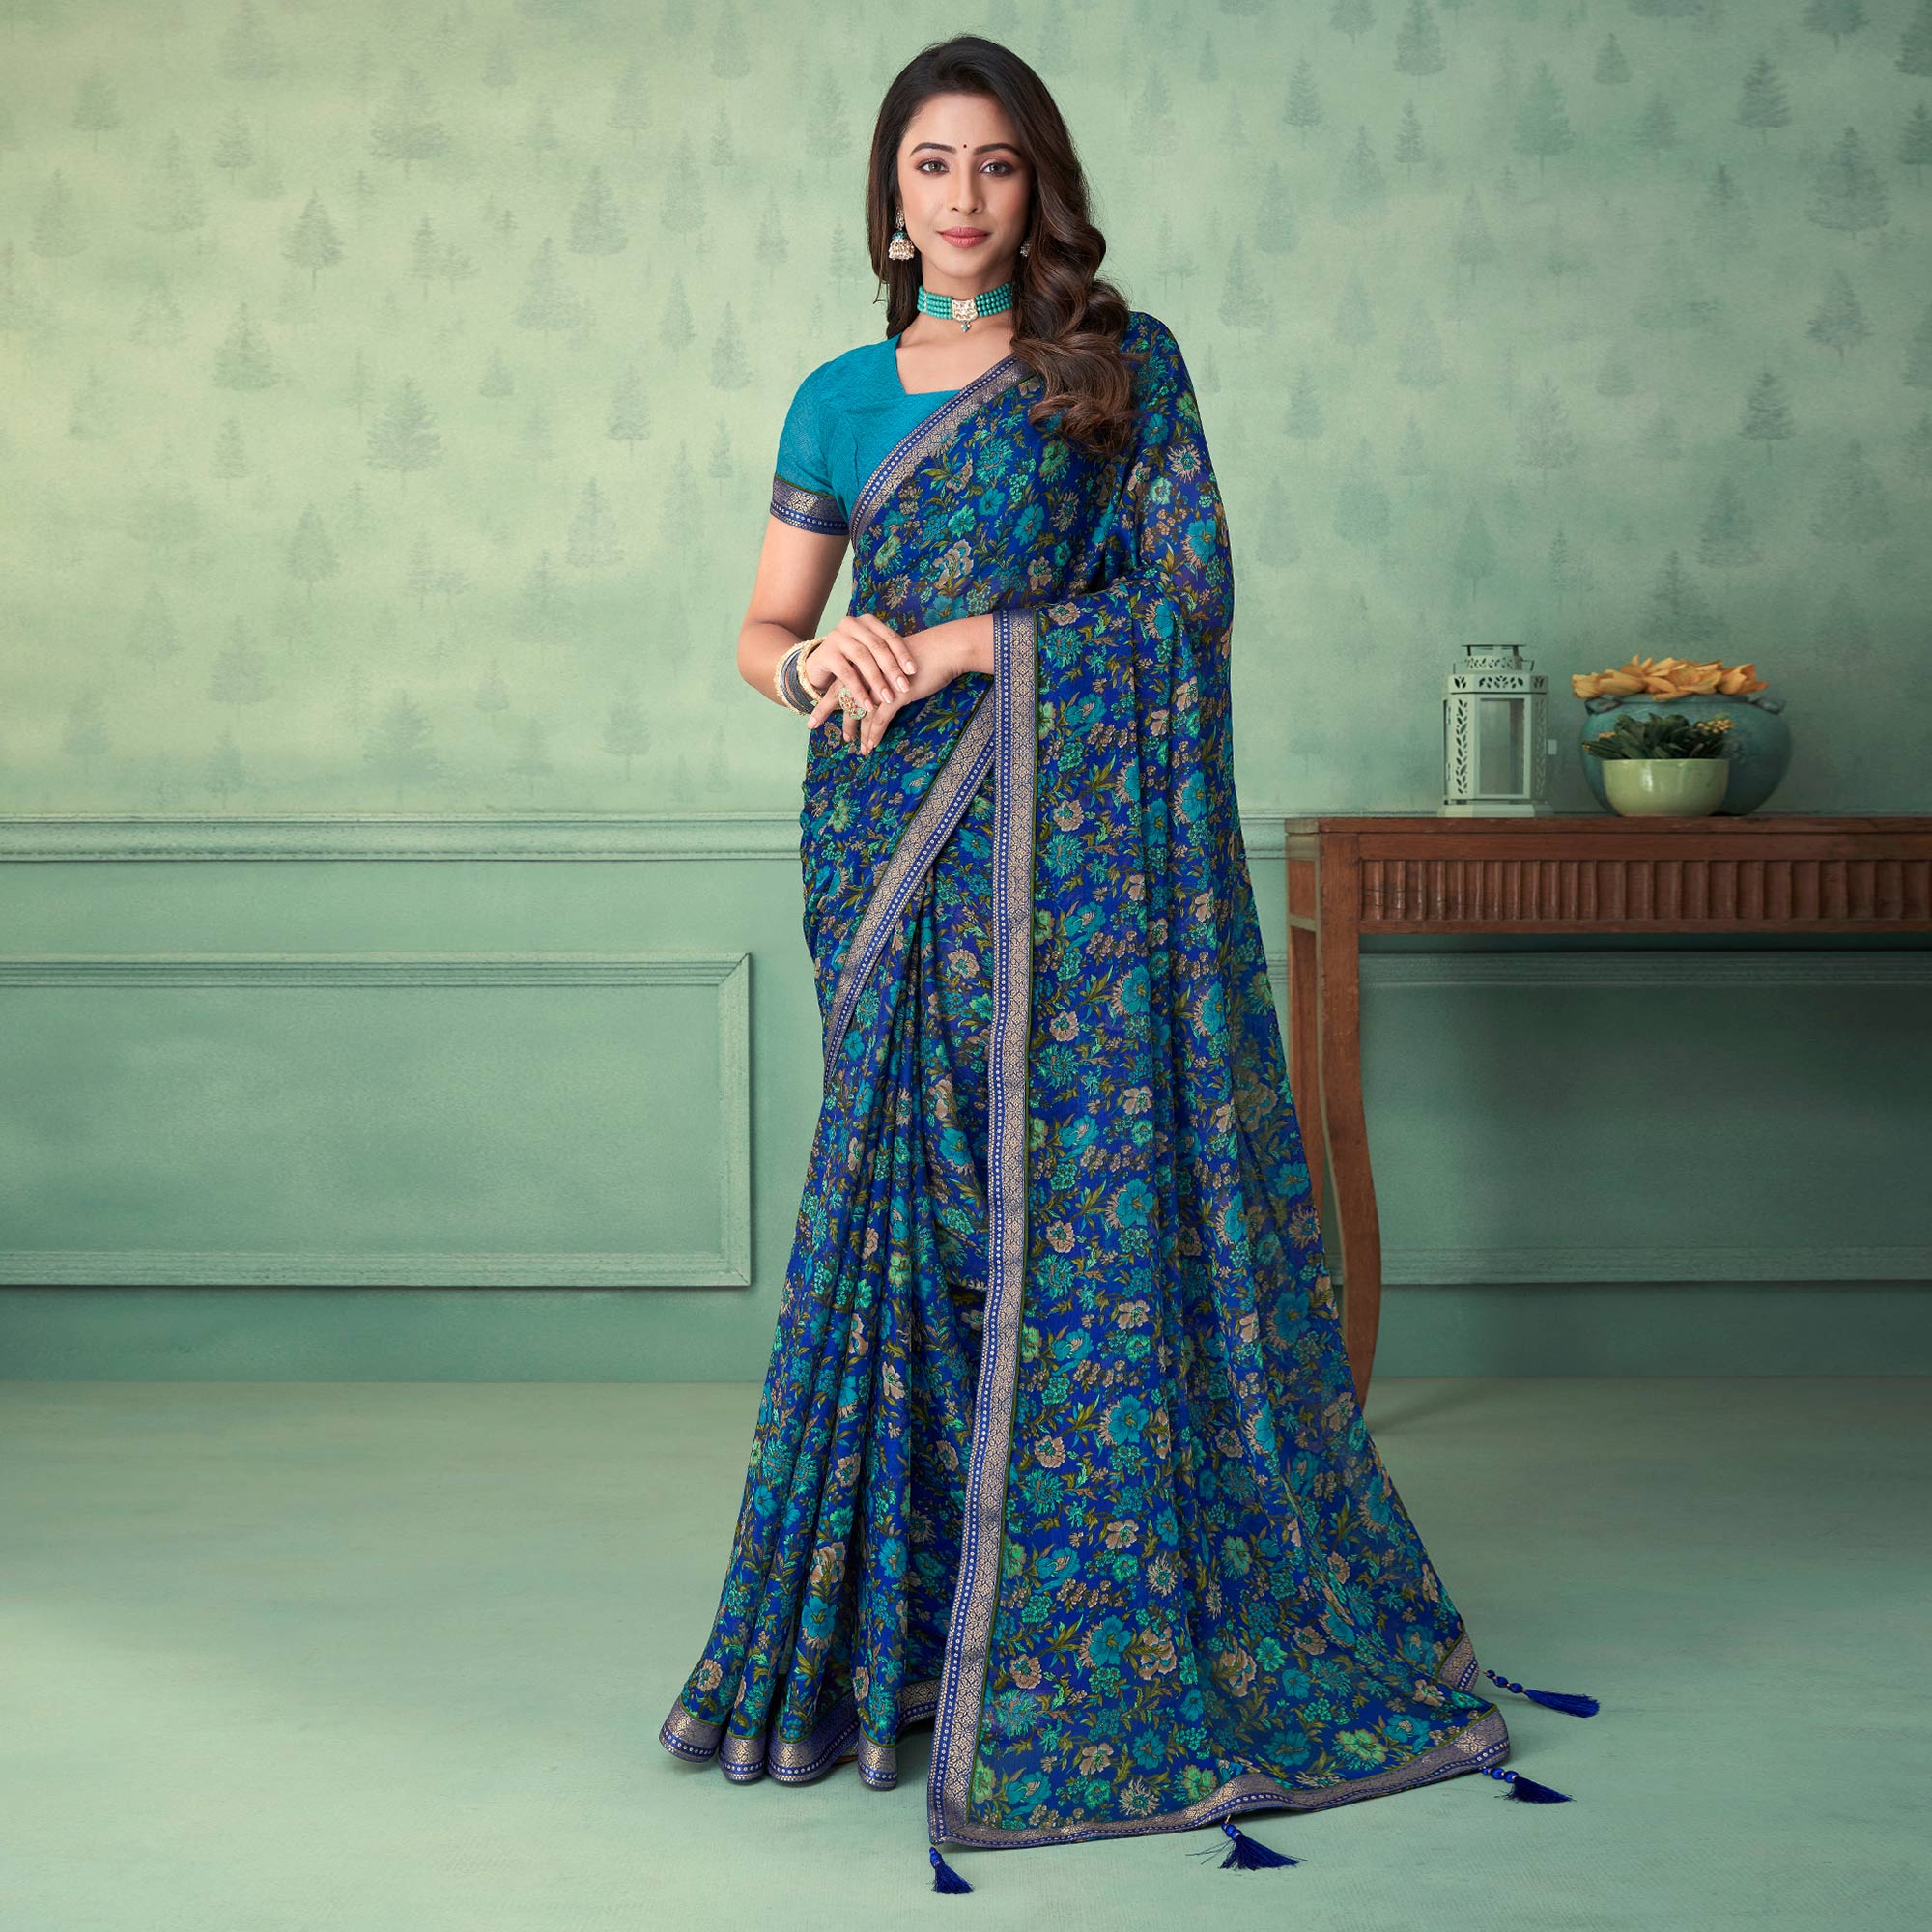 Blue Floral Printed Chiffon Saree With Lace Border